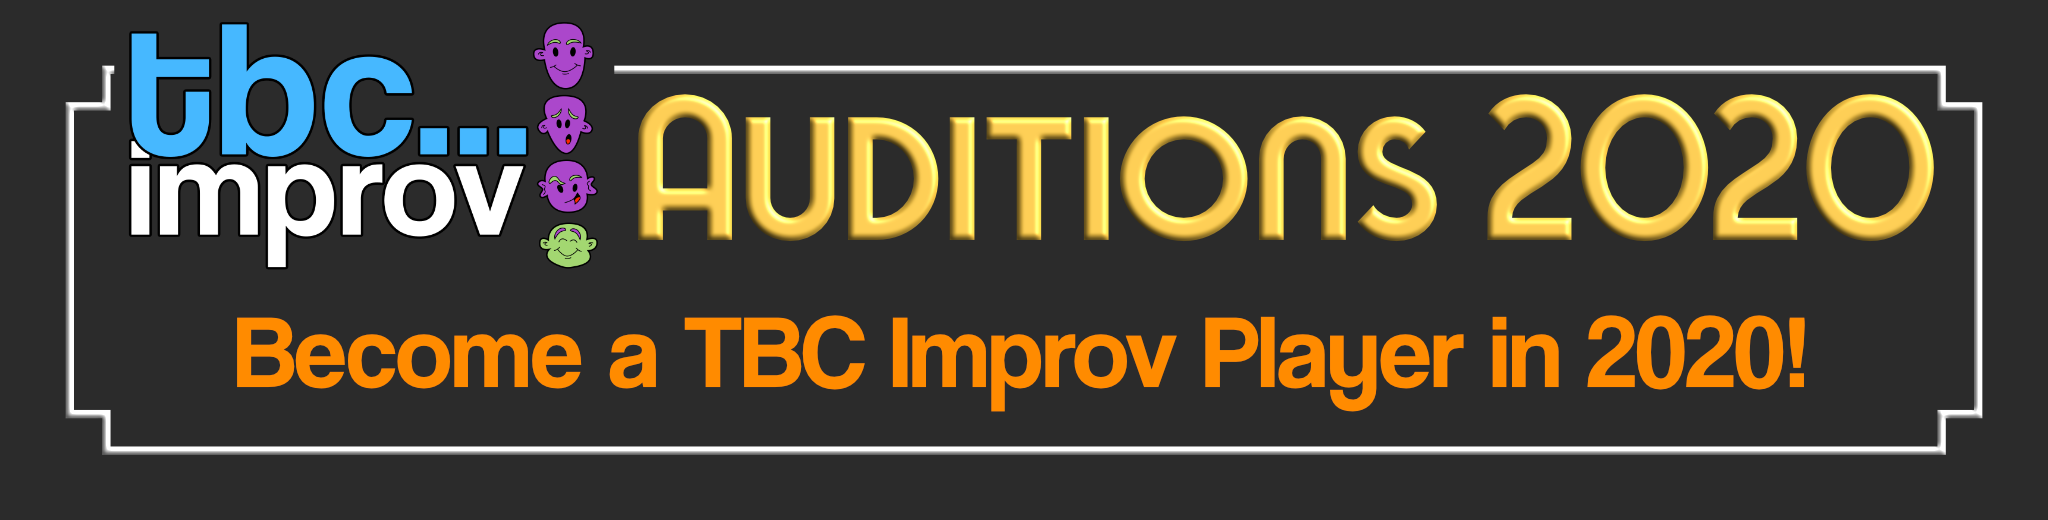 TBC Improv Are Holding Auditions for New Members